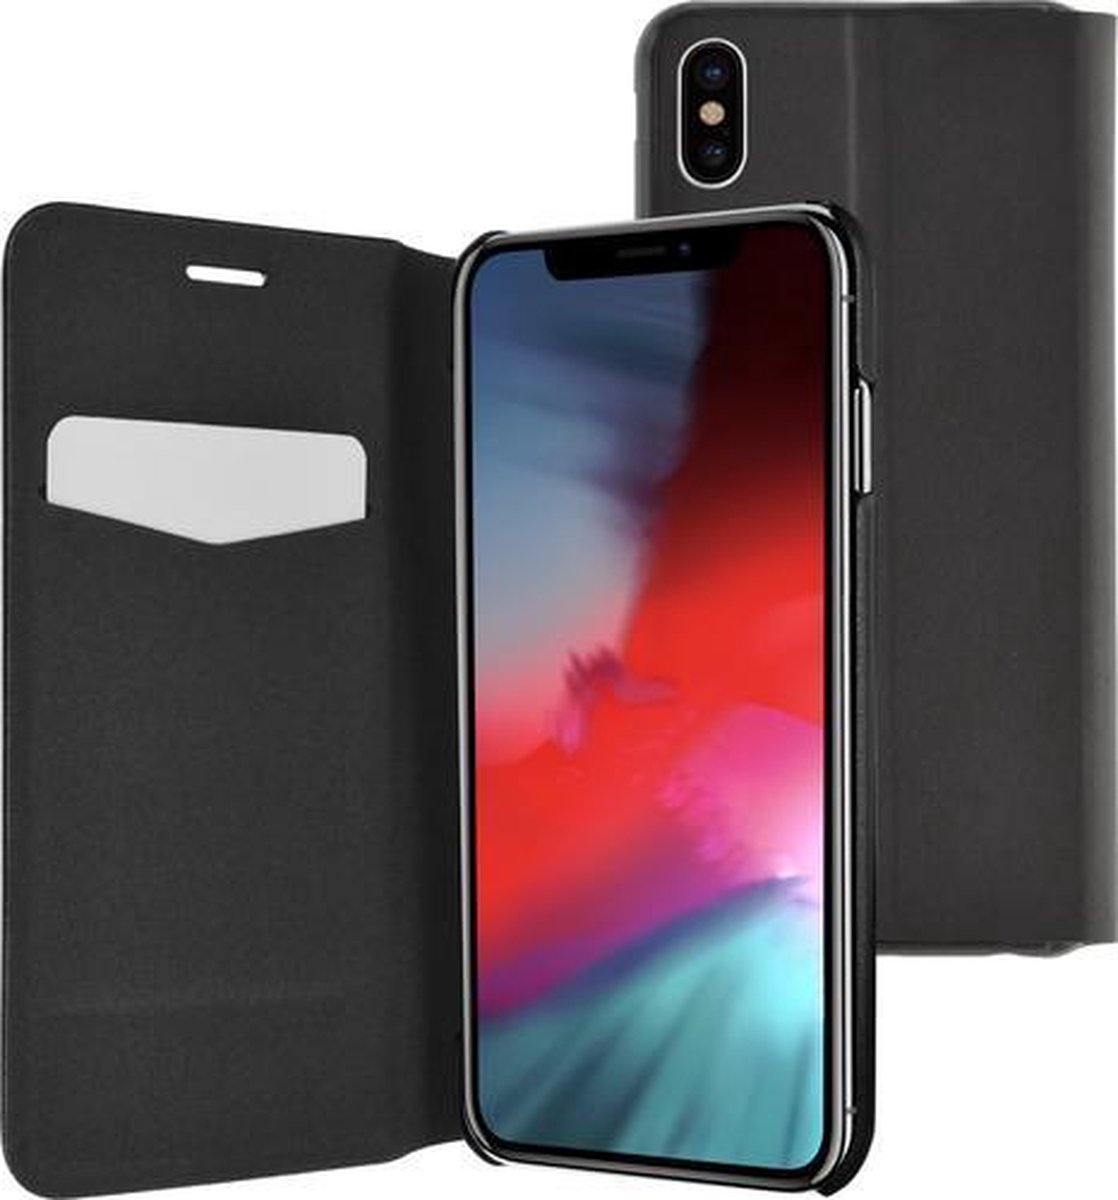 MH by Azuri booklet ultra thin with stand funciton - zwart - voor iPhone Xs Max